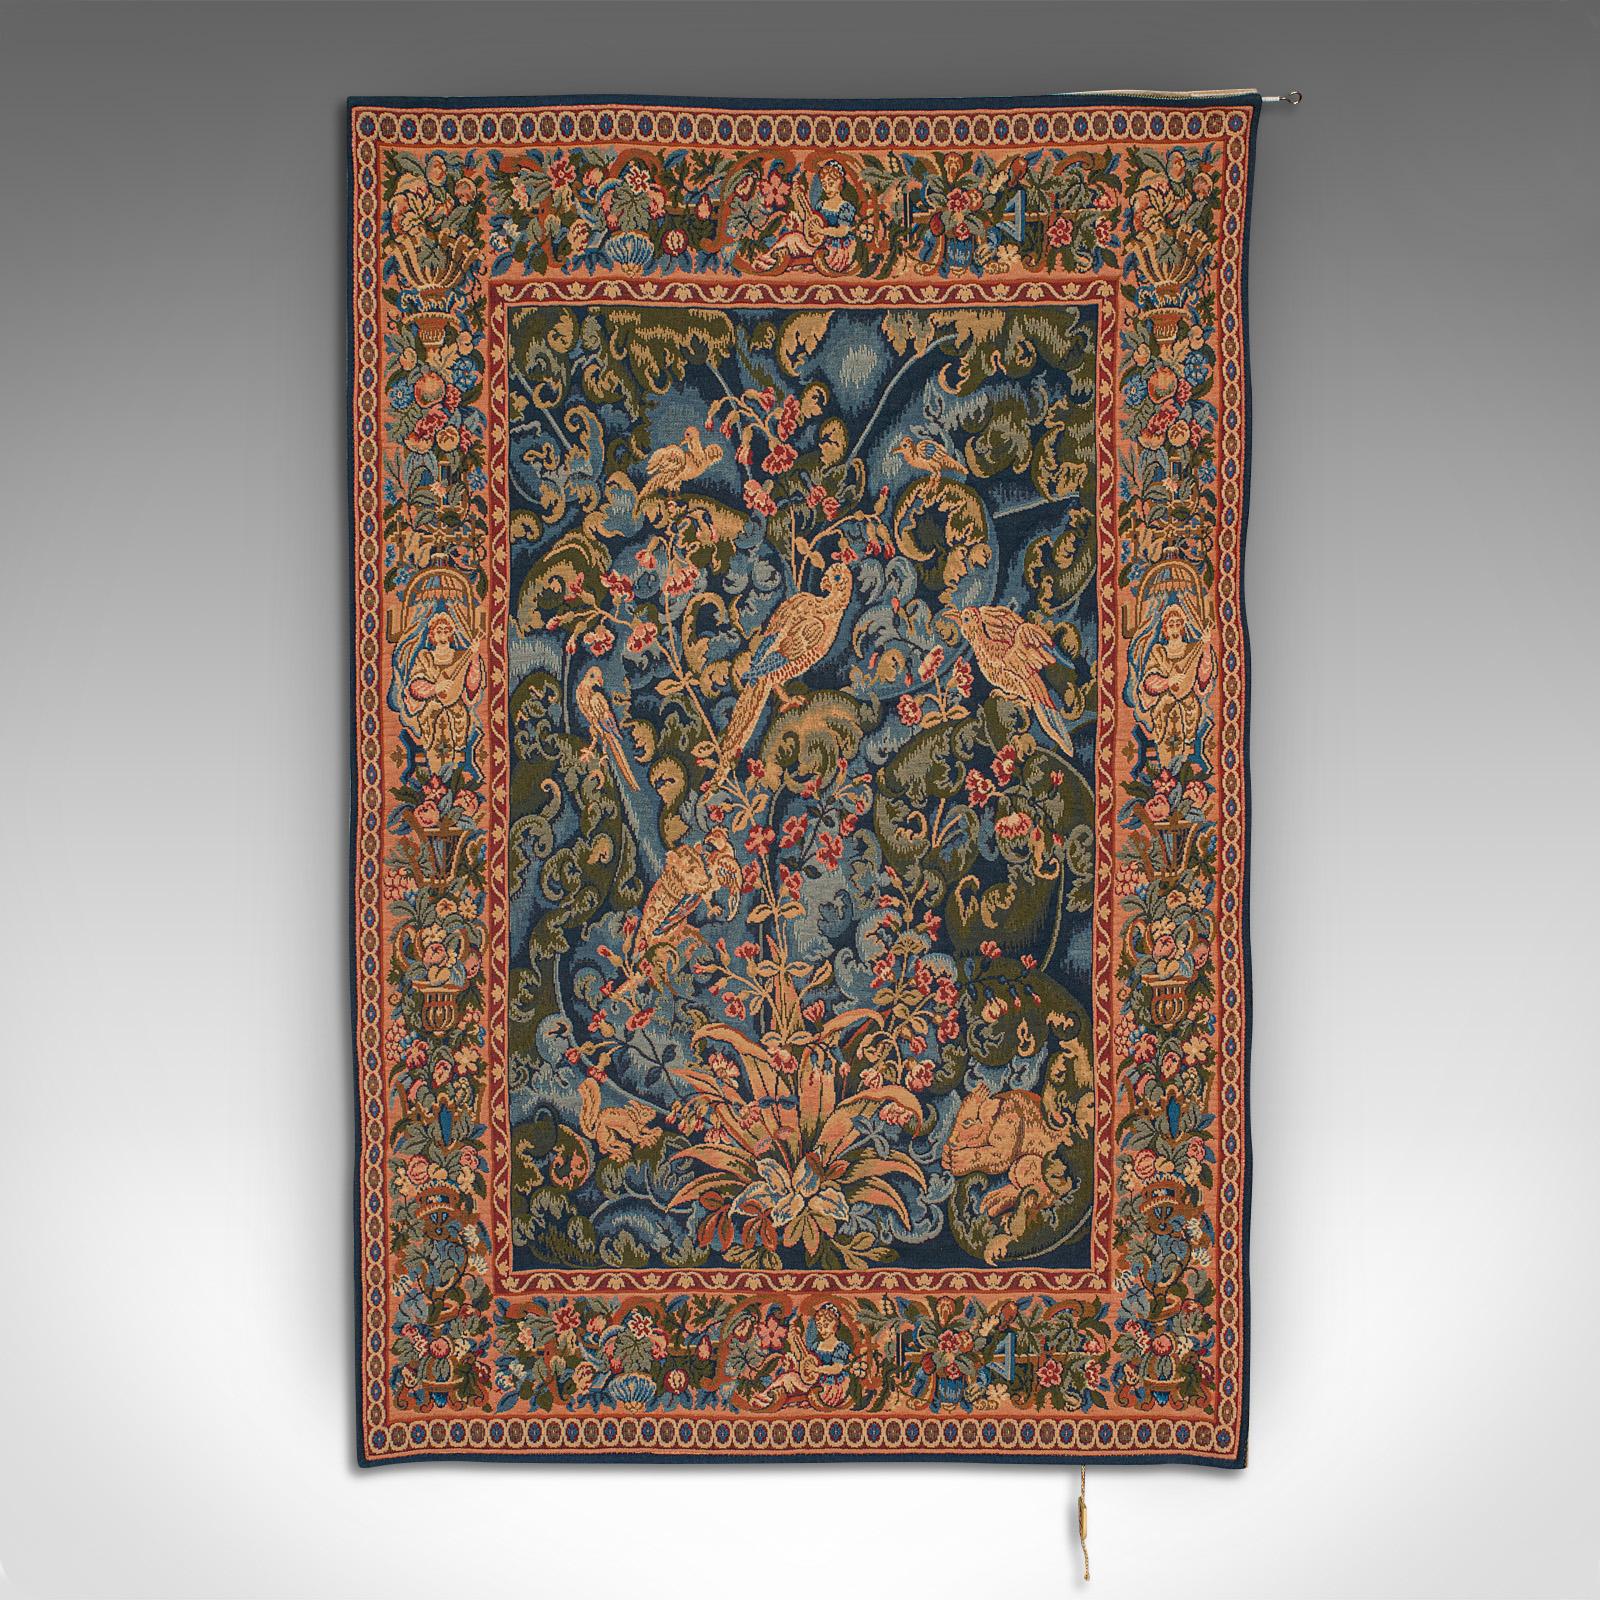 This is a vintage decorative tapestry. A French, needlepoint wall panel, dating to the late 20th century, circa 1980.

Inspired by the feuilles d’aristoloche tapestry originating in the Netherlands during the 16th century
Displays a desirable